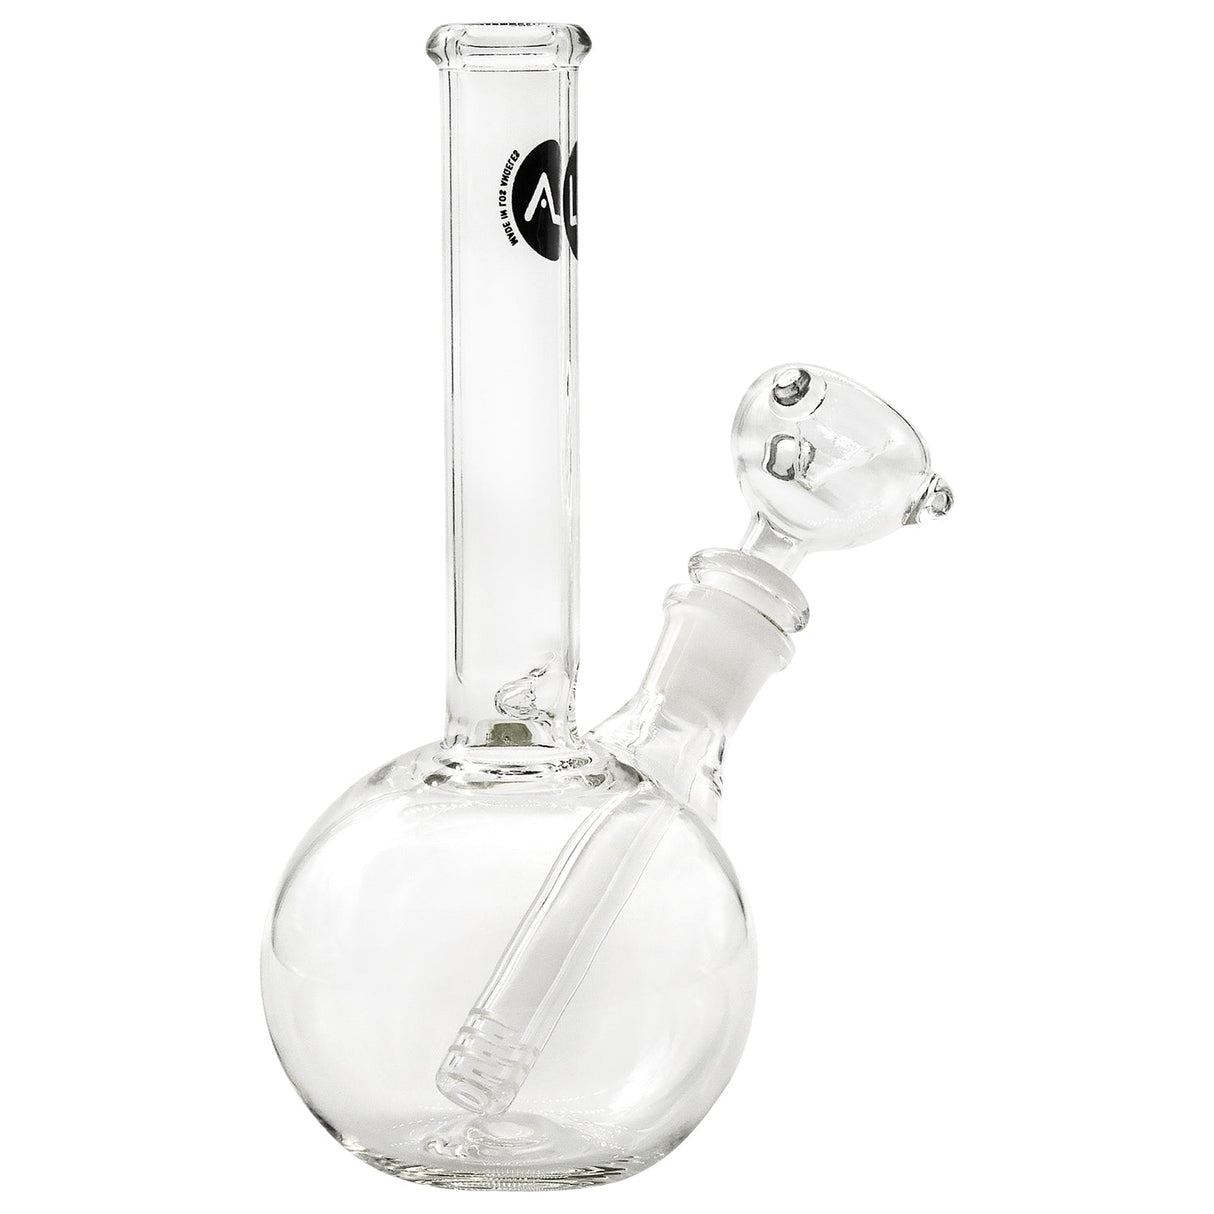 LA Pipes Simple Bubble Bong in clear borosilicate glass, 8" height, side view with removable bowl